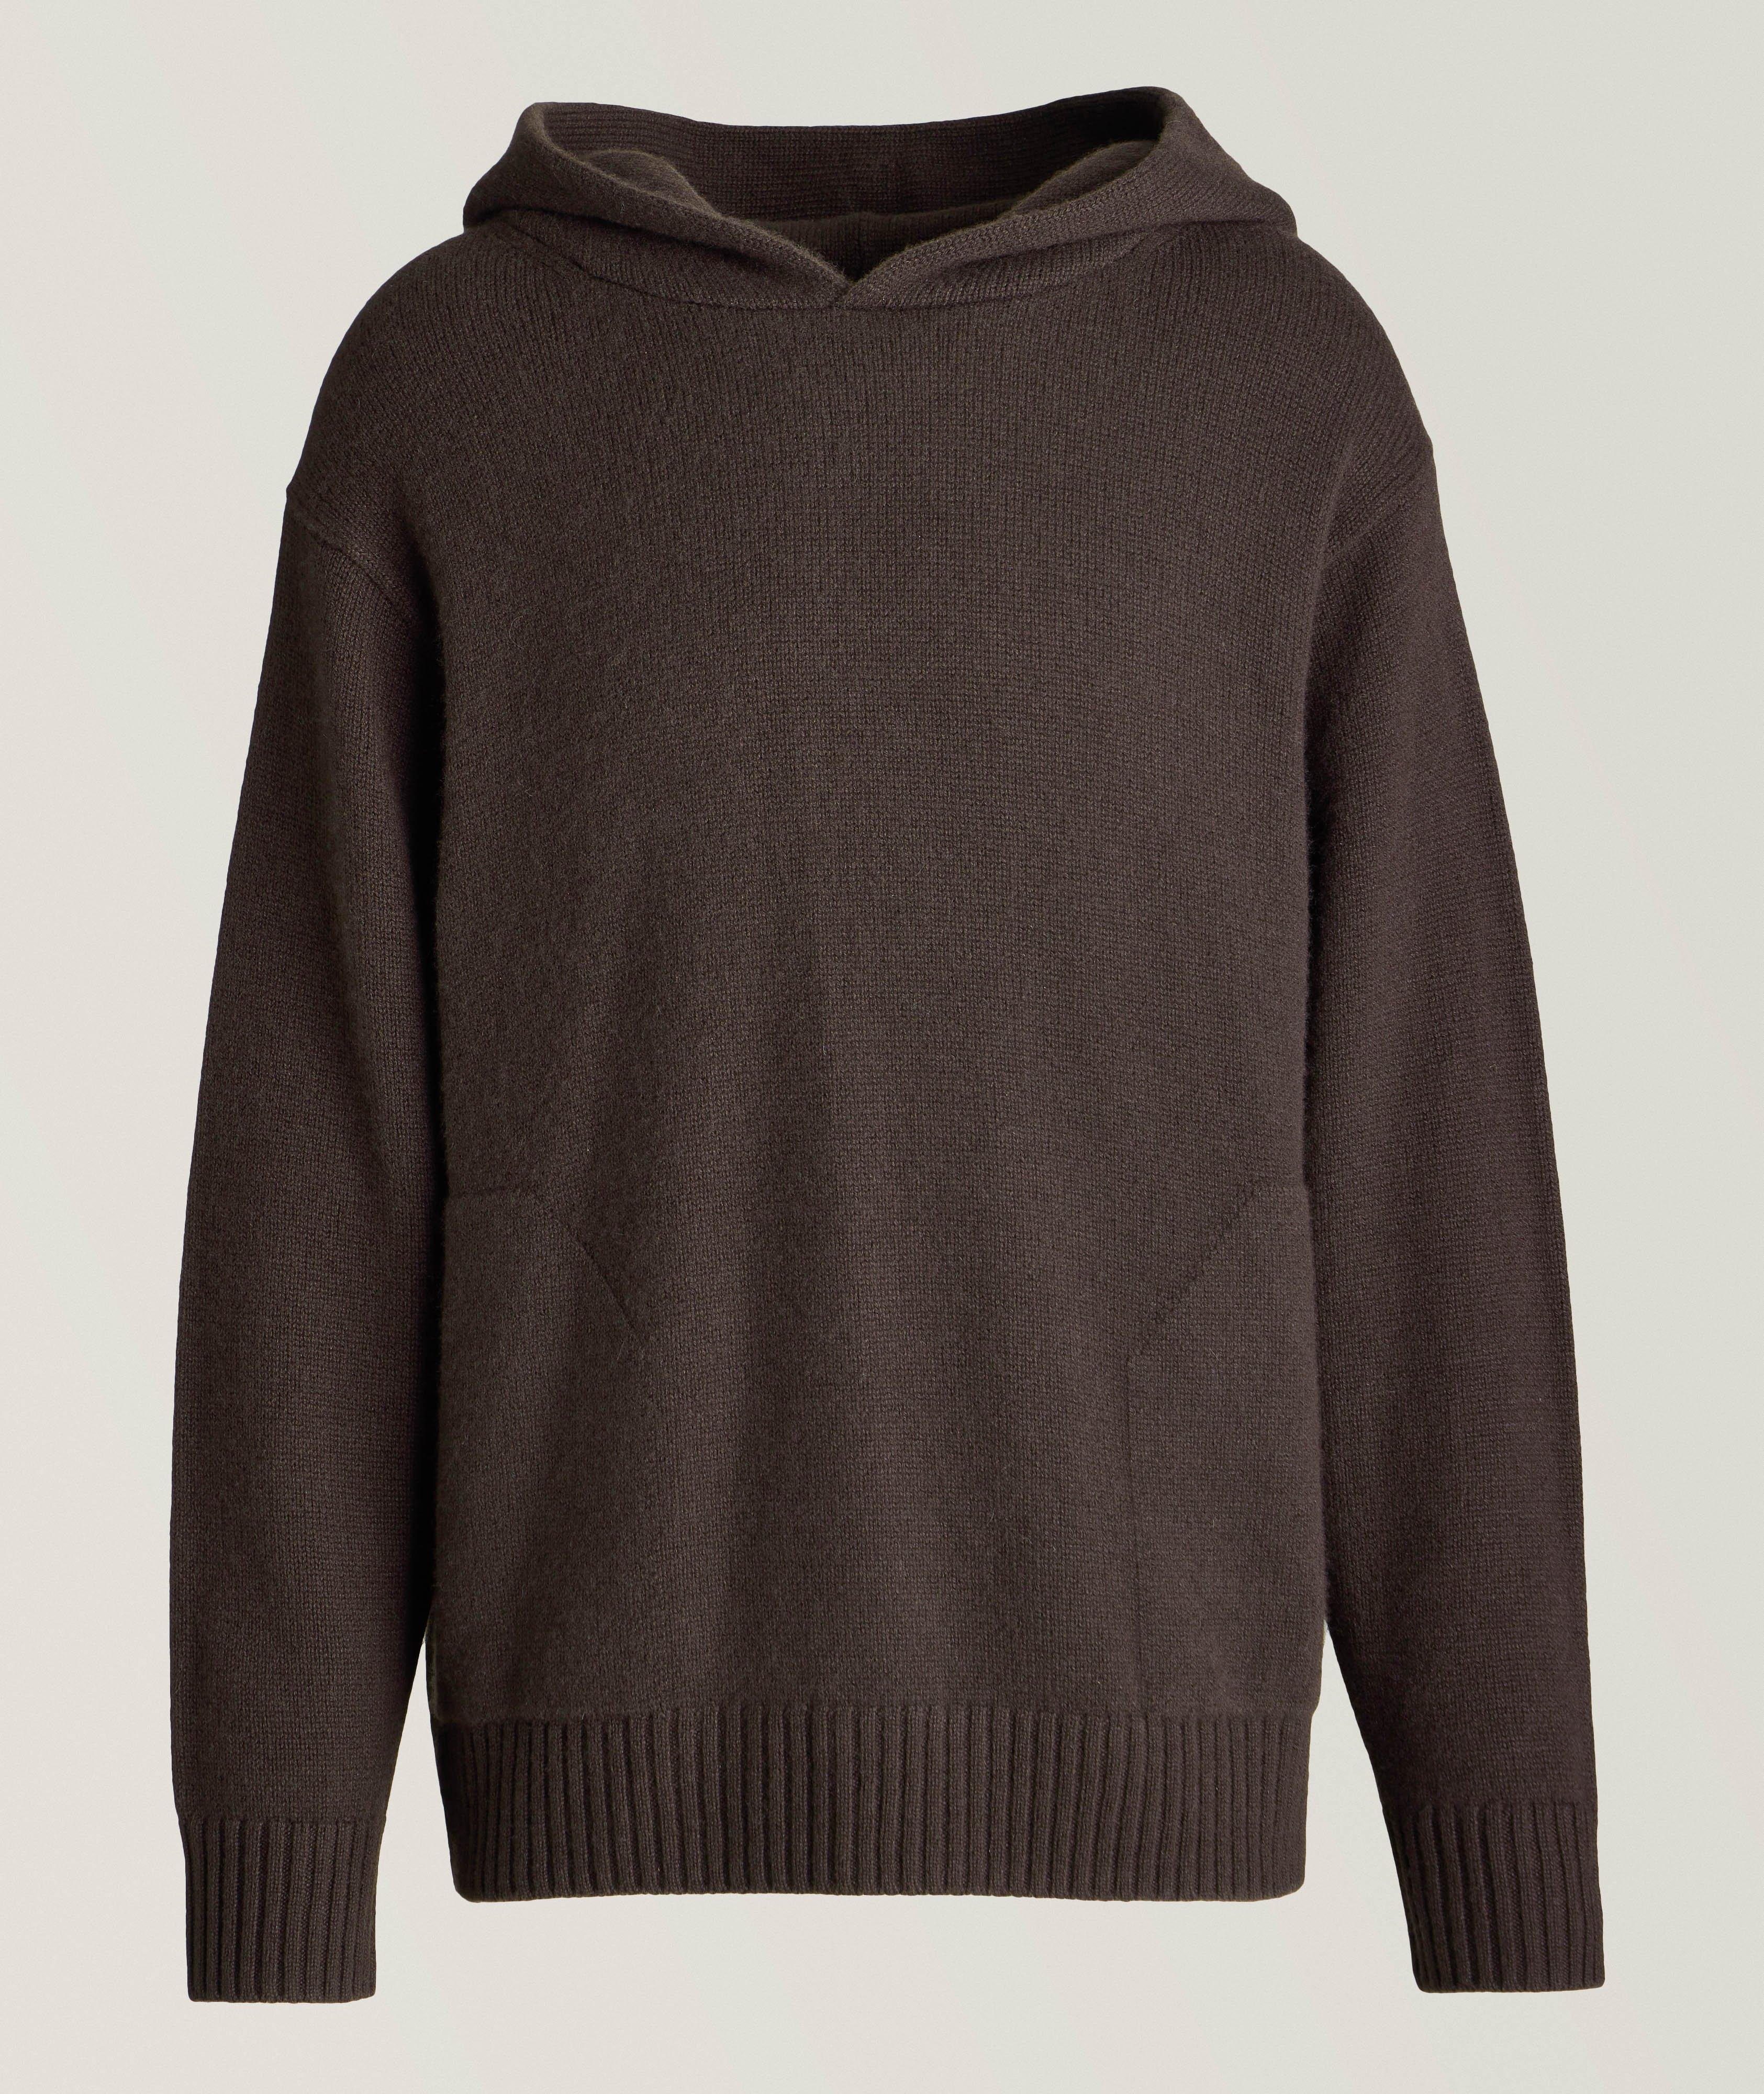 Cashmere Hooded Sweater image 0